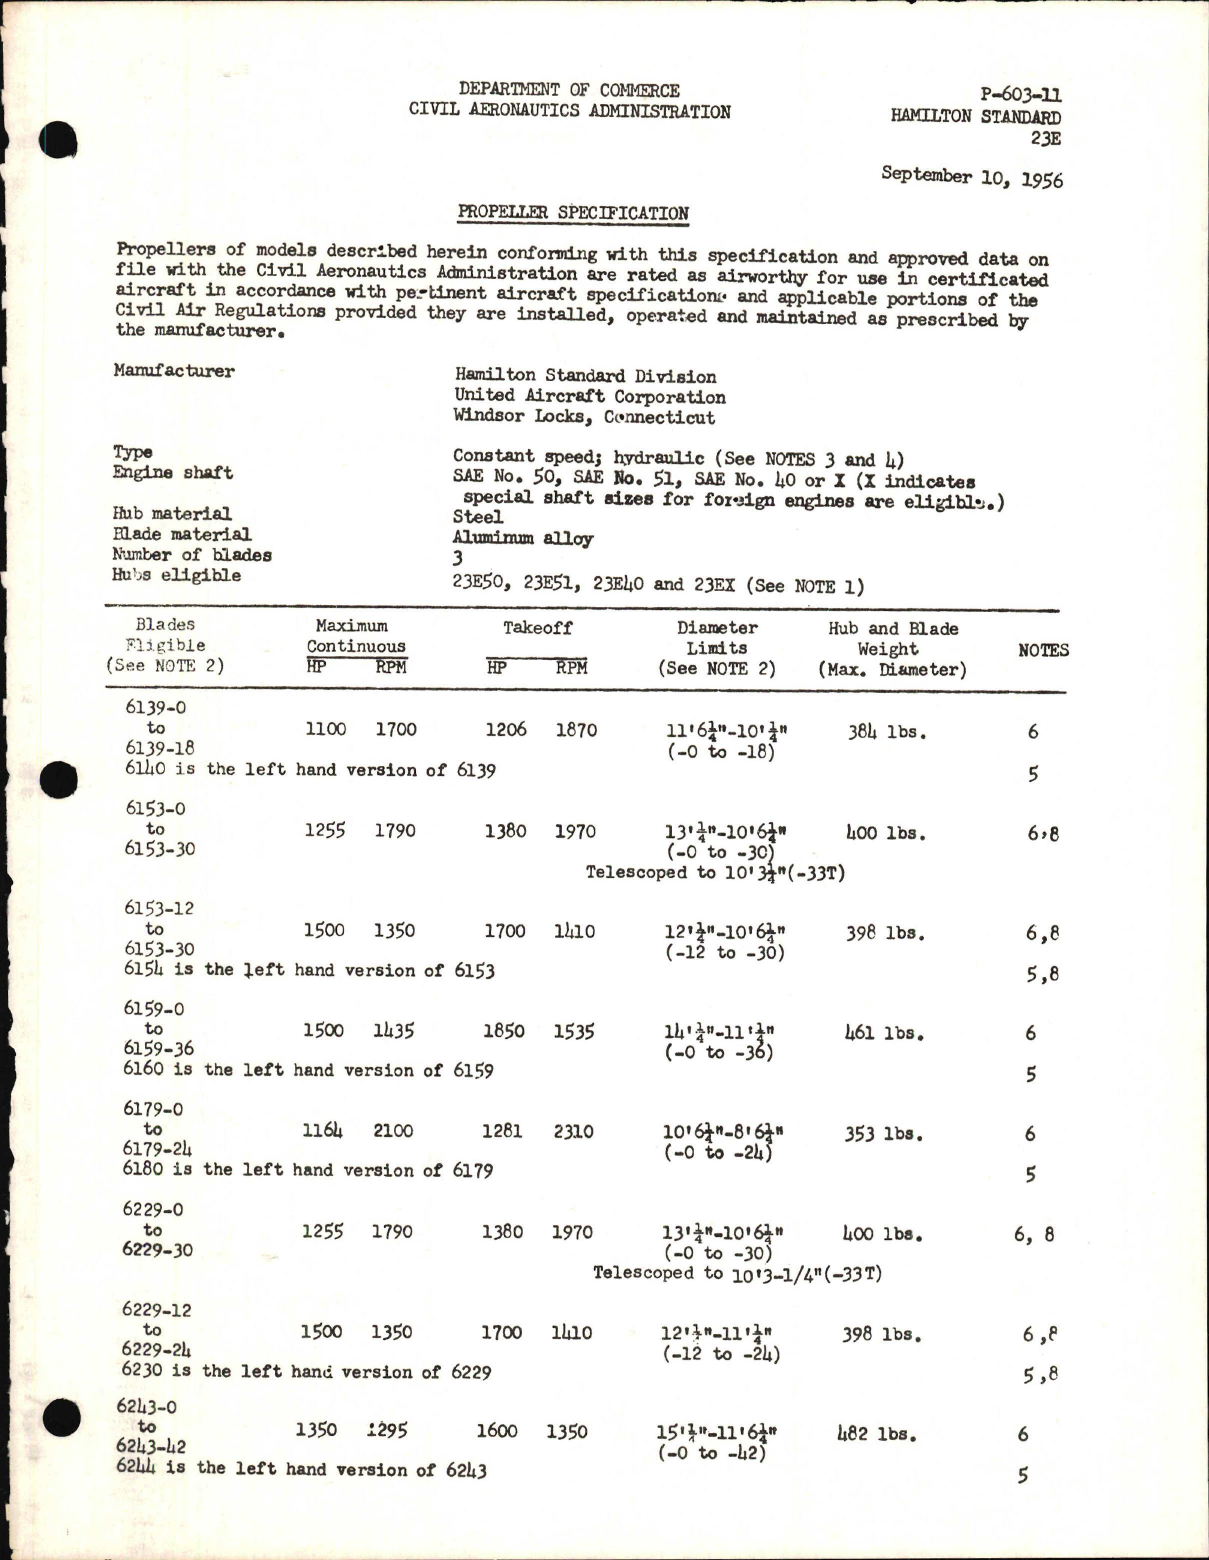 Sample page 1 from AirCorps Library document: 23E